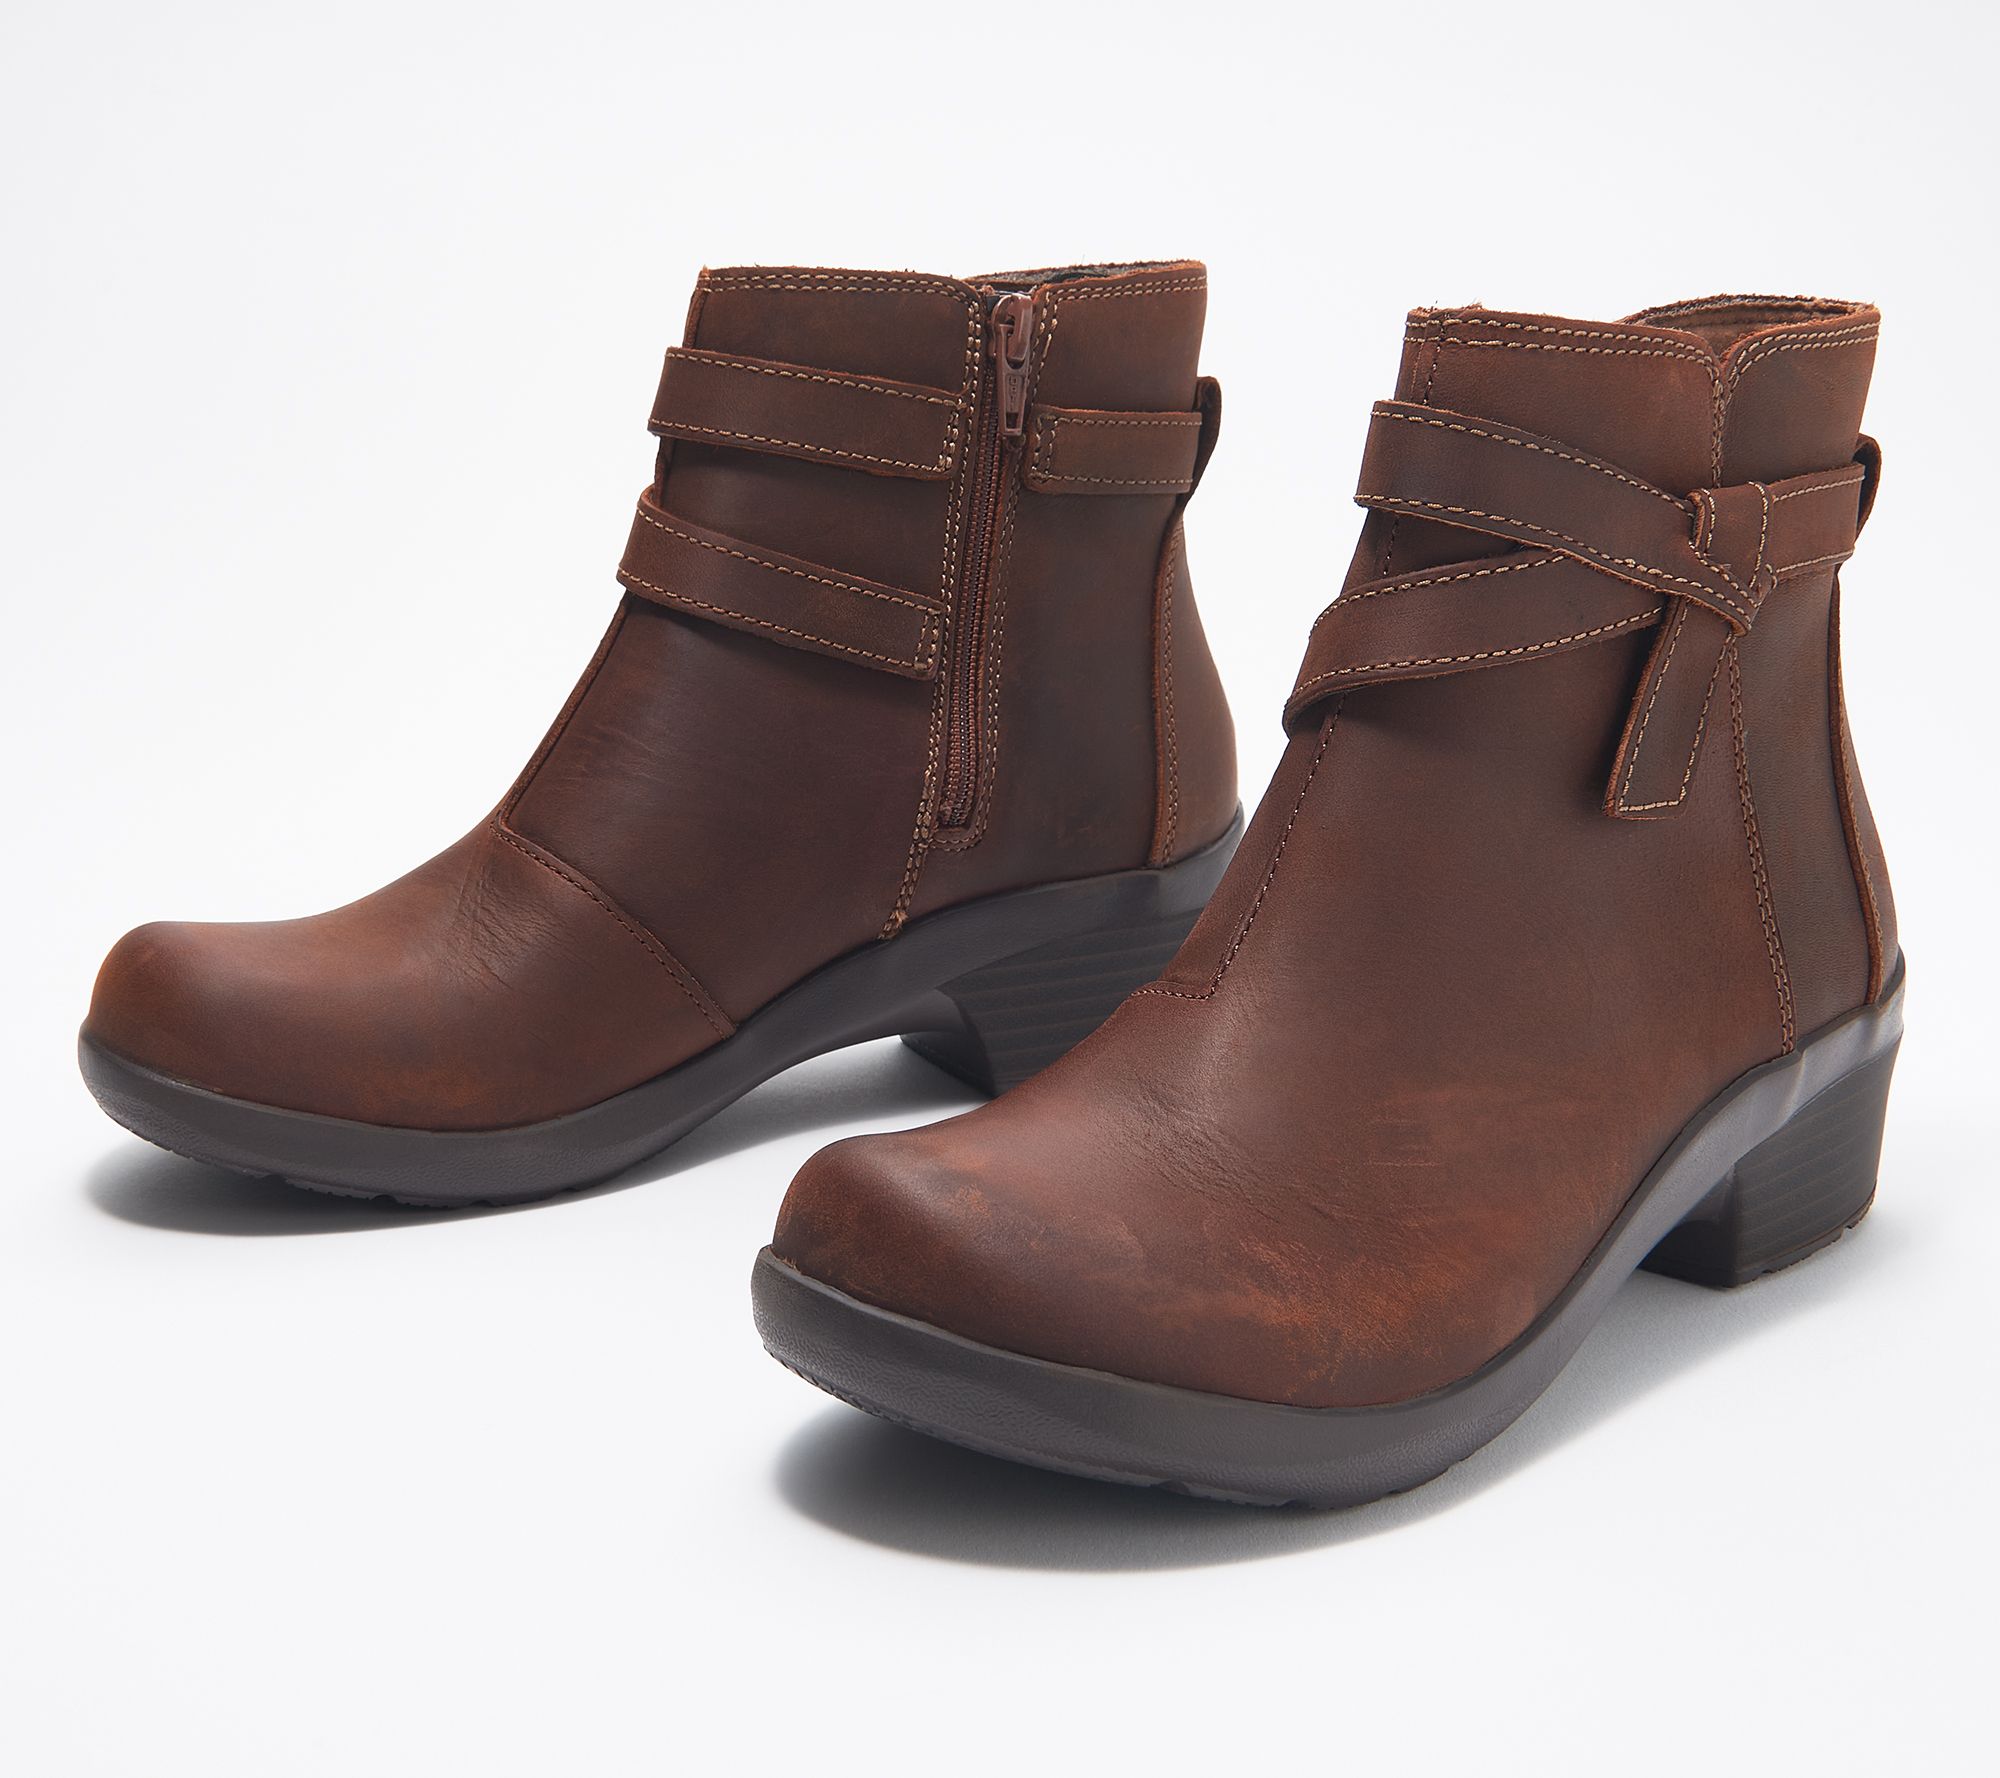 Clarks Collection Leather Ankle Boots - Angie Spice